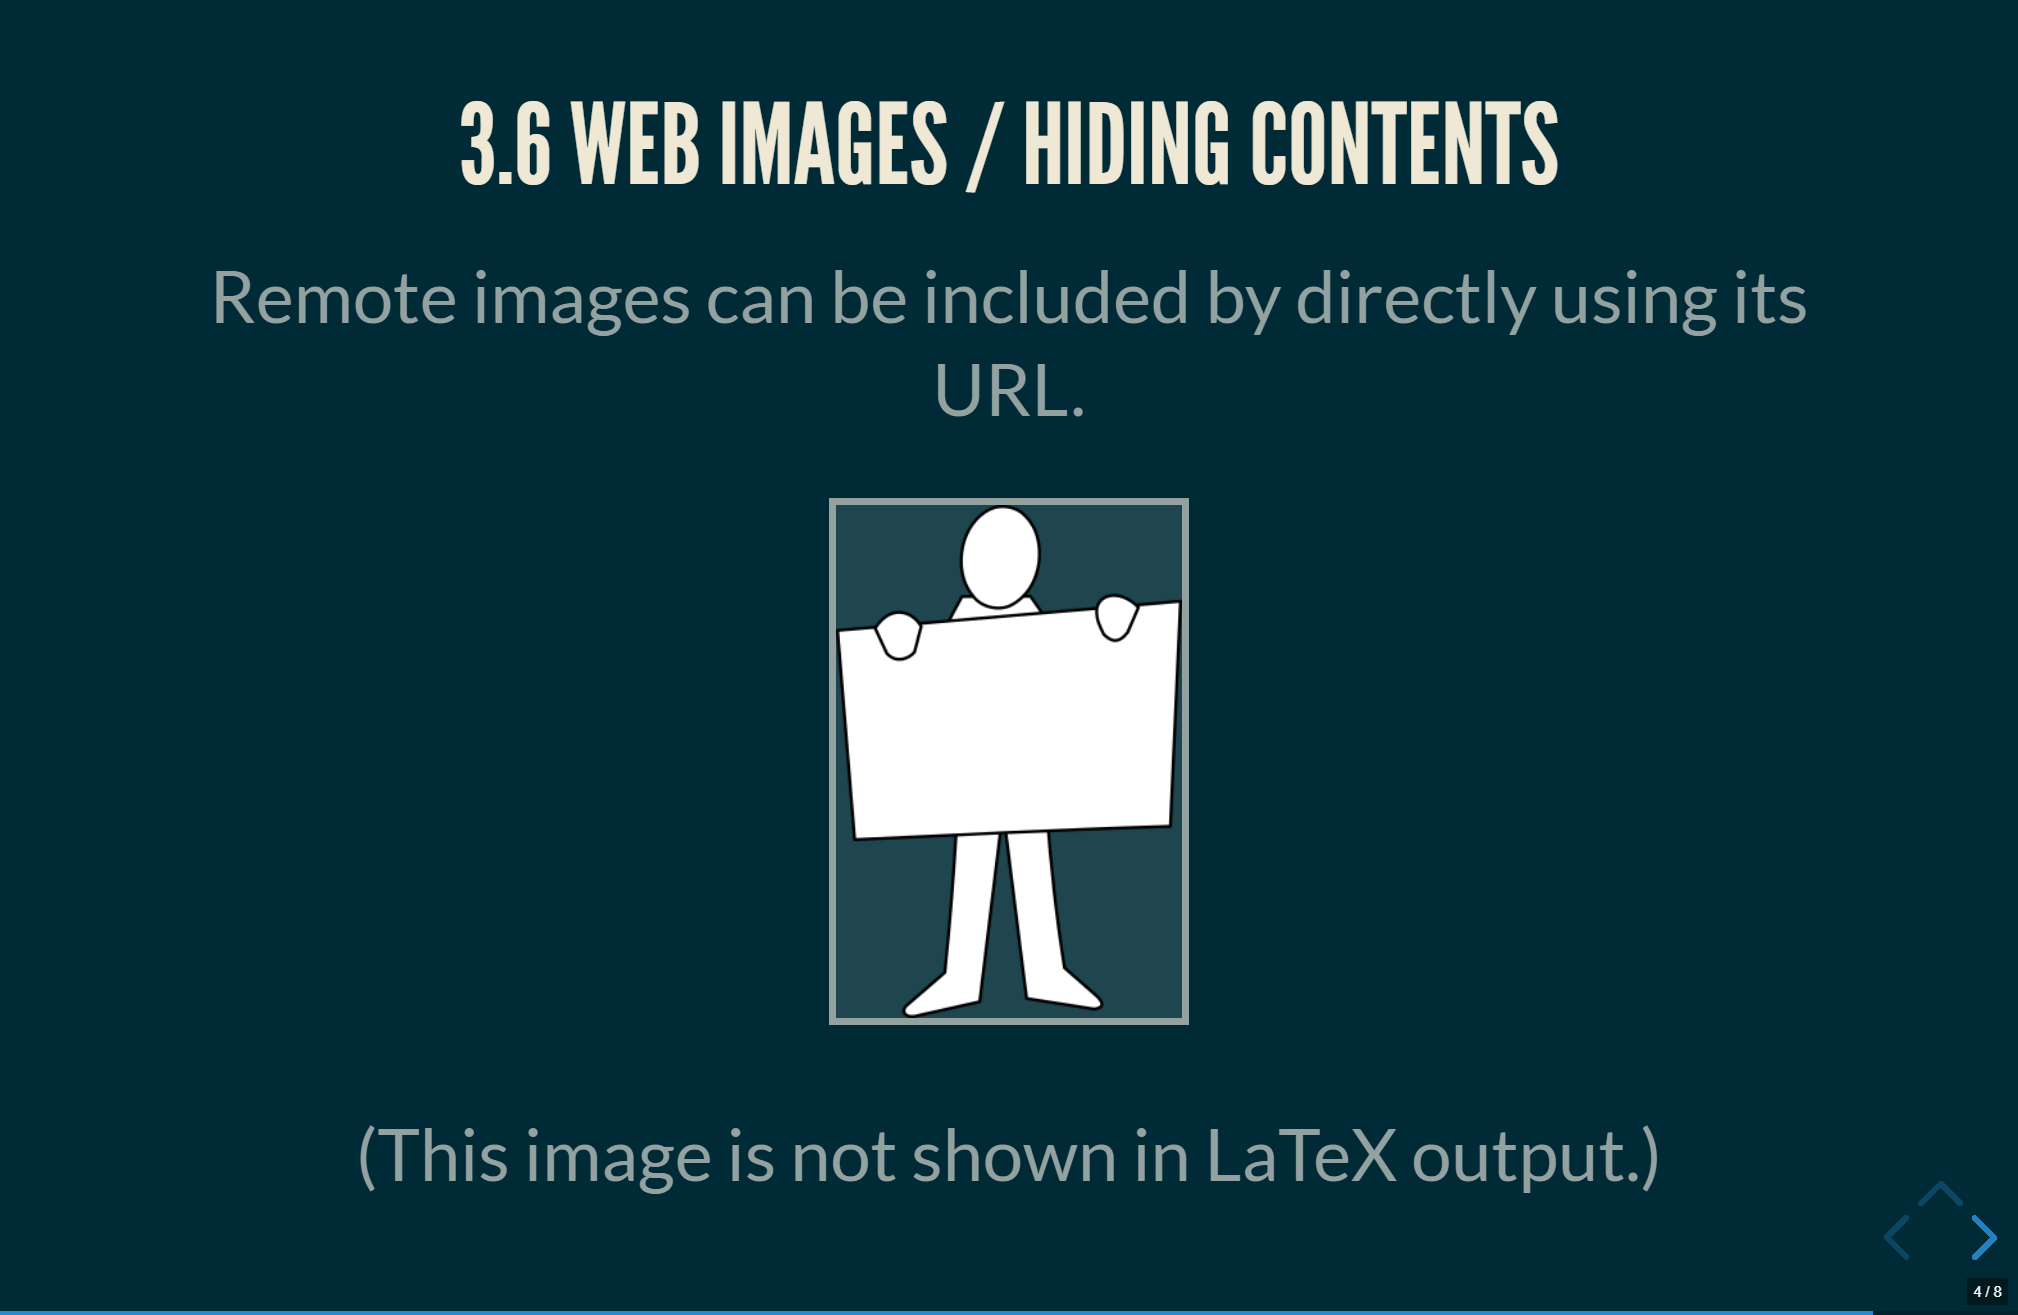 ../Assets/Images/Org-Teaching/Quickstart/Lecture-Editing_Hiding-Contents-reveal.js.png